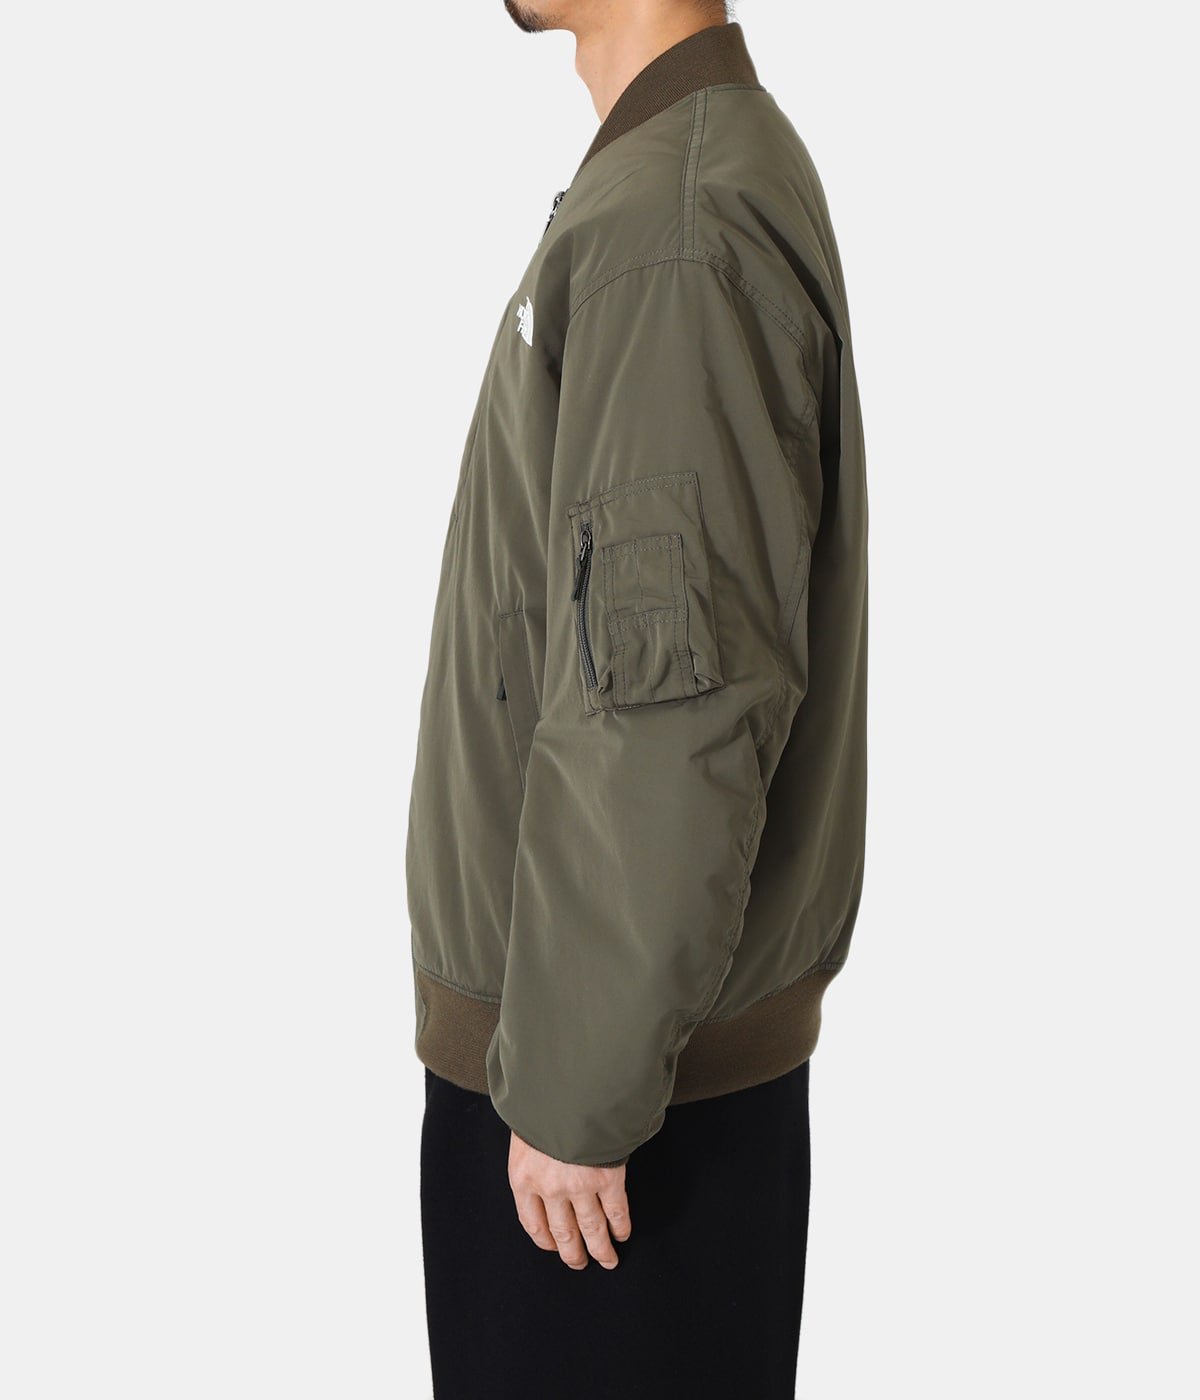 Insulation Bomber Jacket | THE NORTH FACE(ザ ノースフェイス